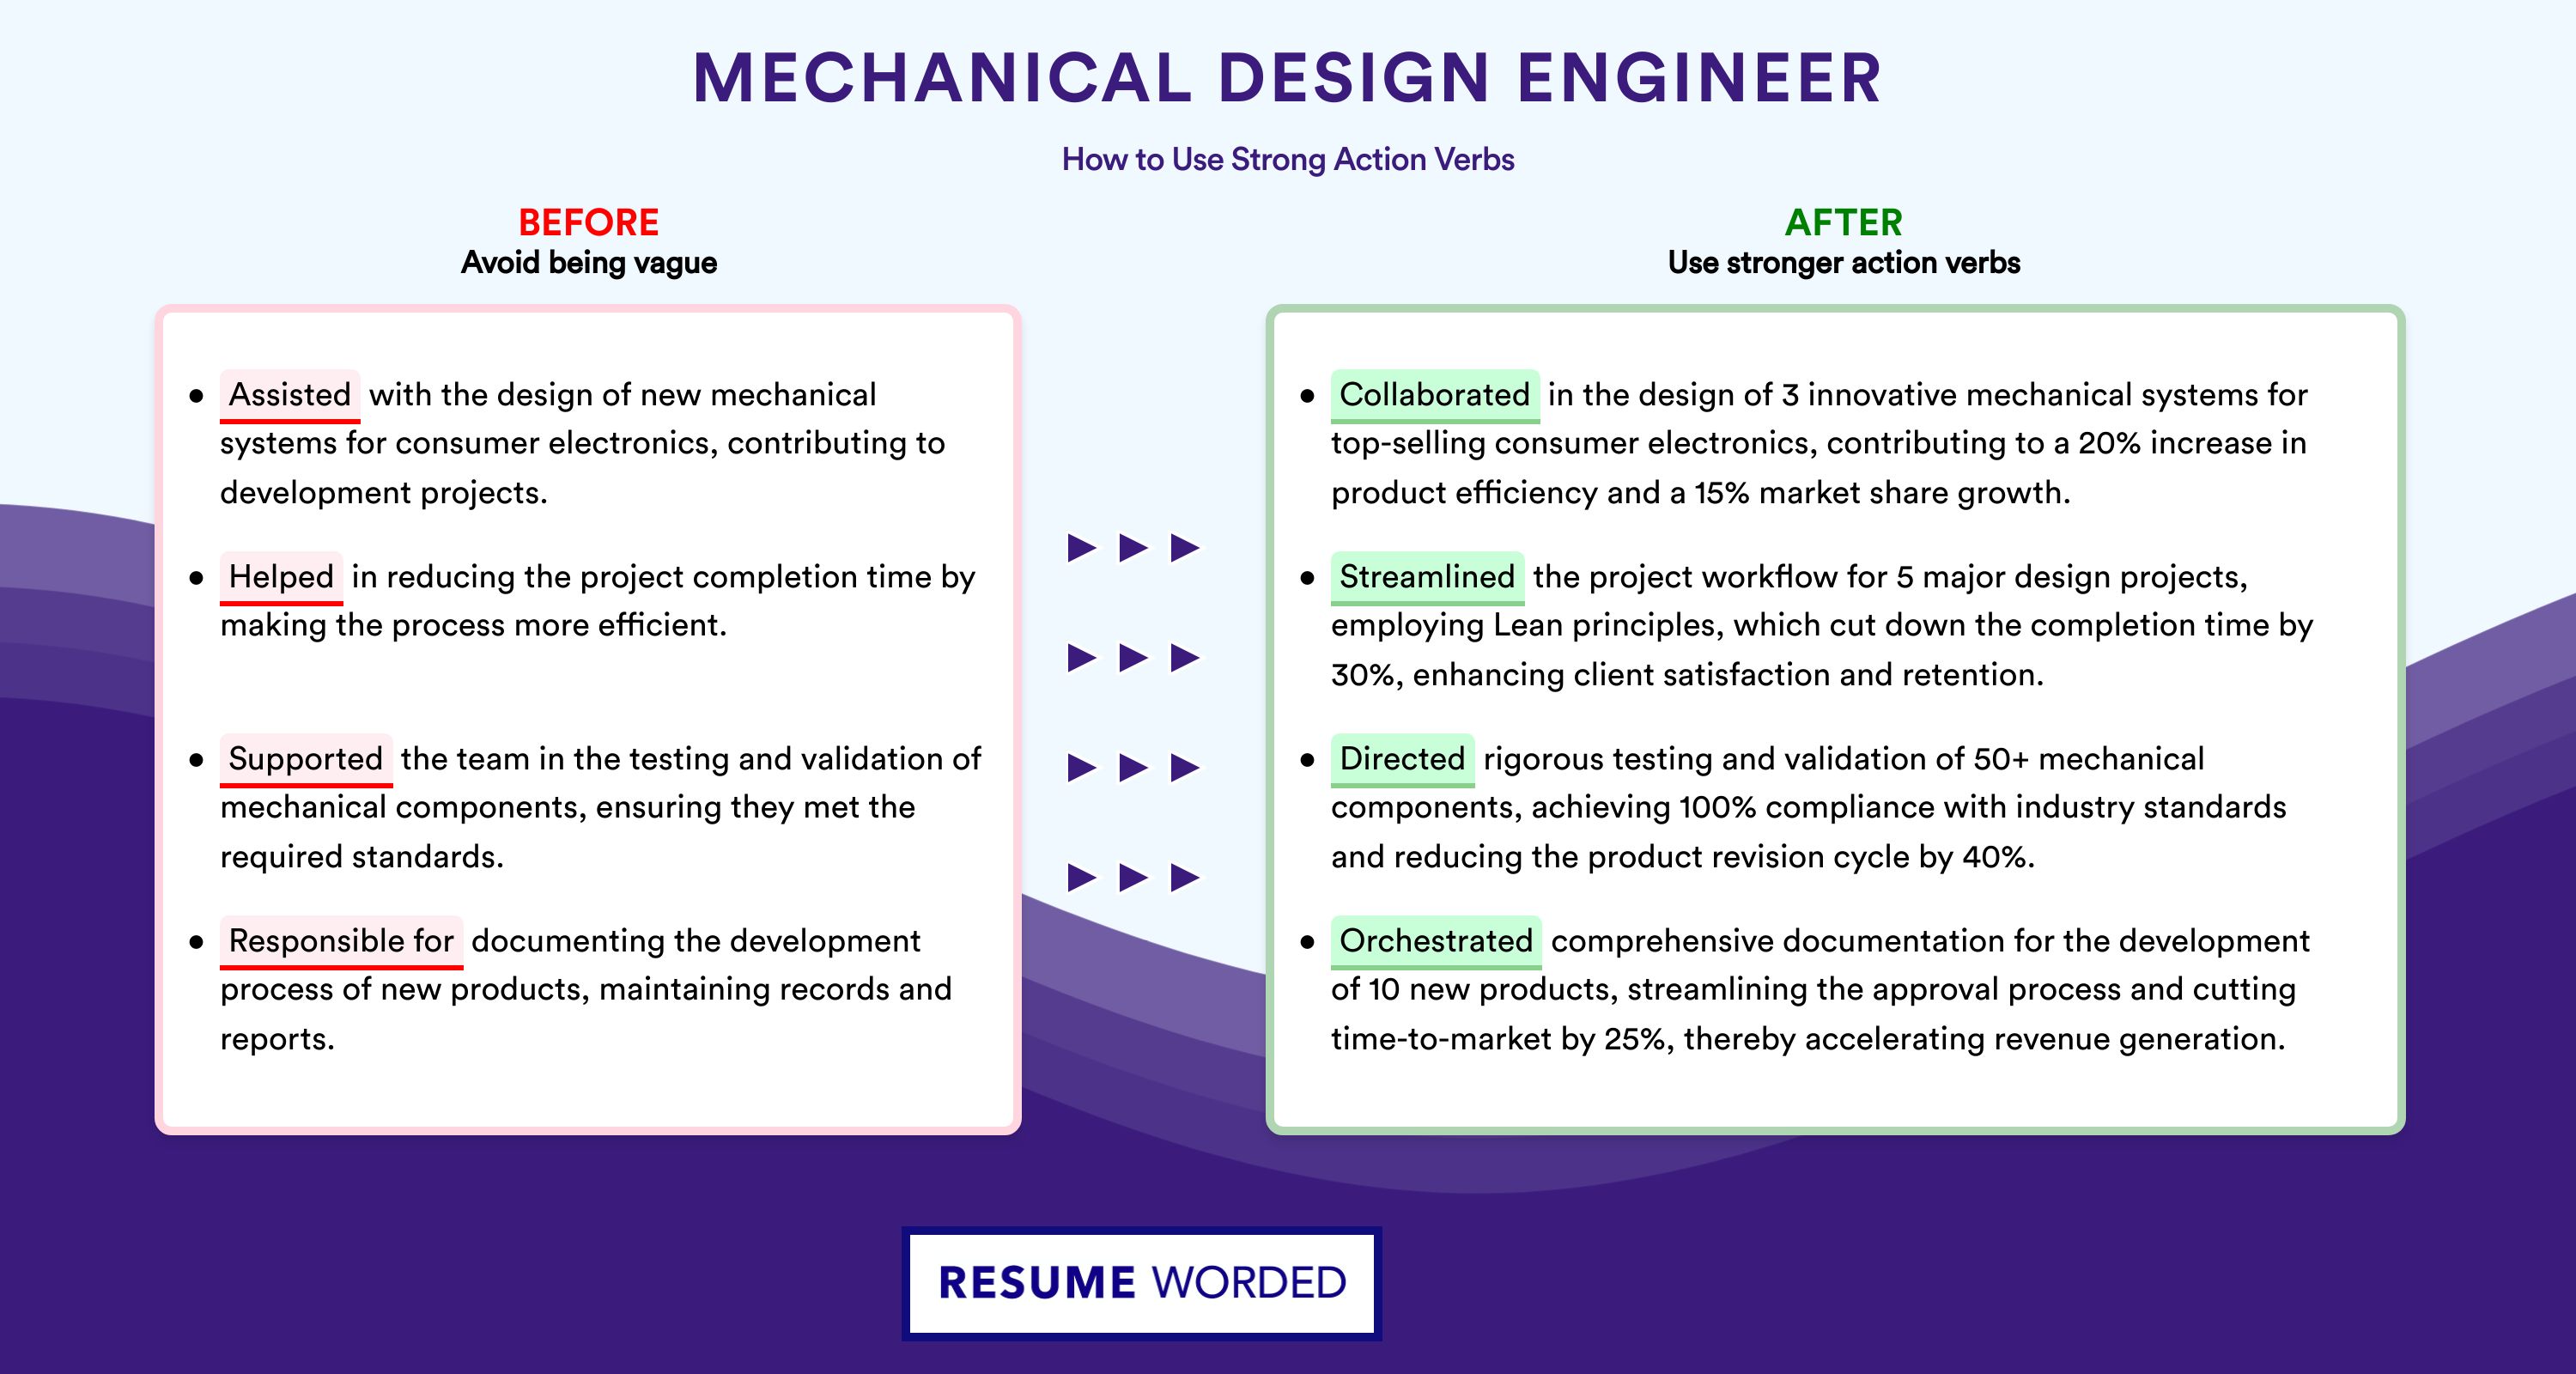 Action Verbs for Mechanical Design Engineer